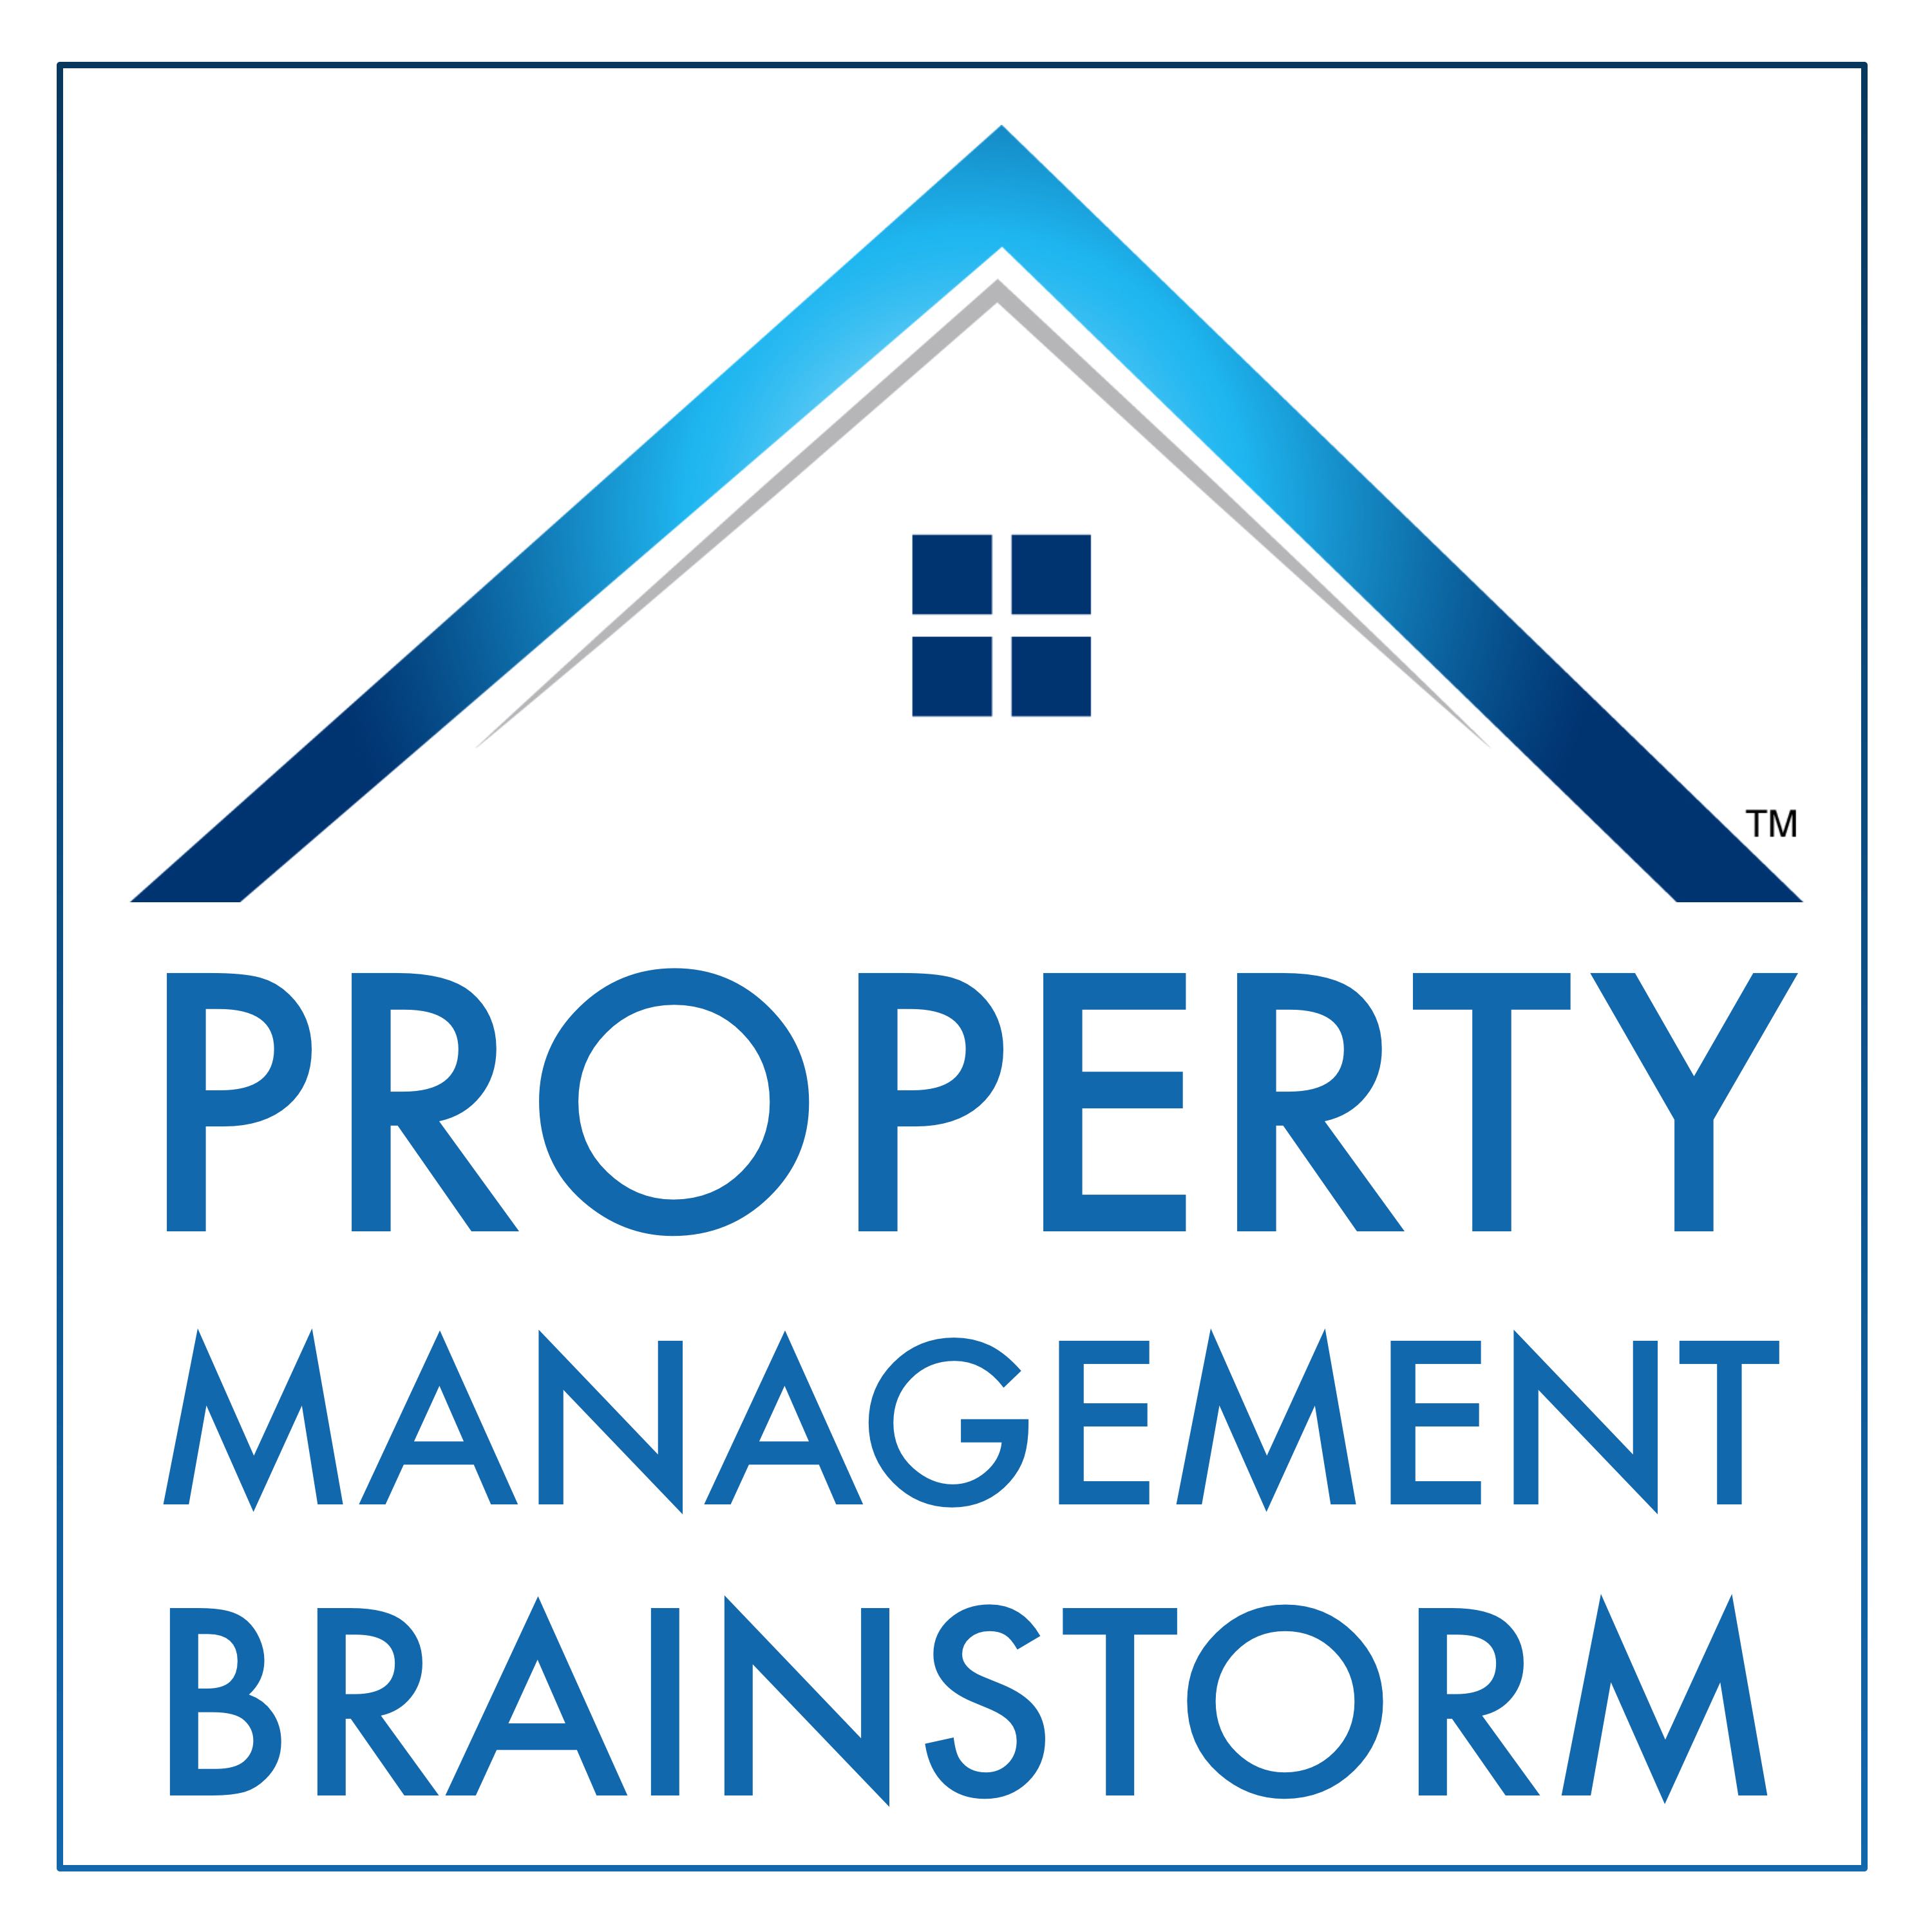 Episode 48: Property Management Bookkeeping, Featuring Taylor Hou of APM Help